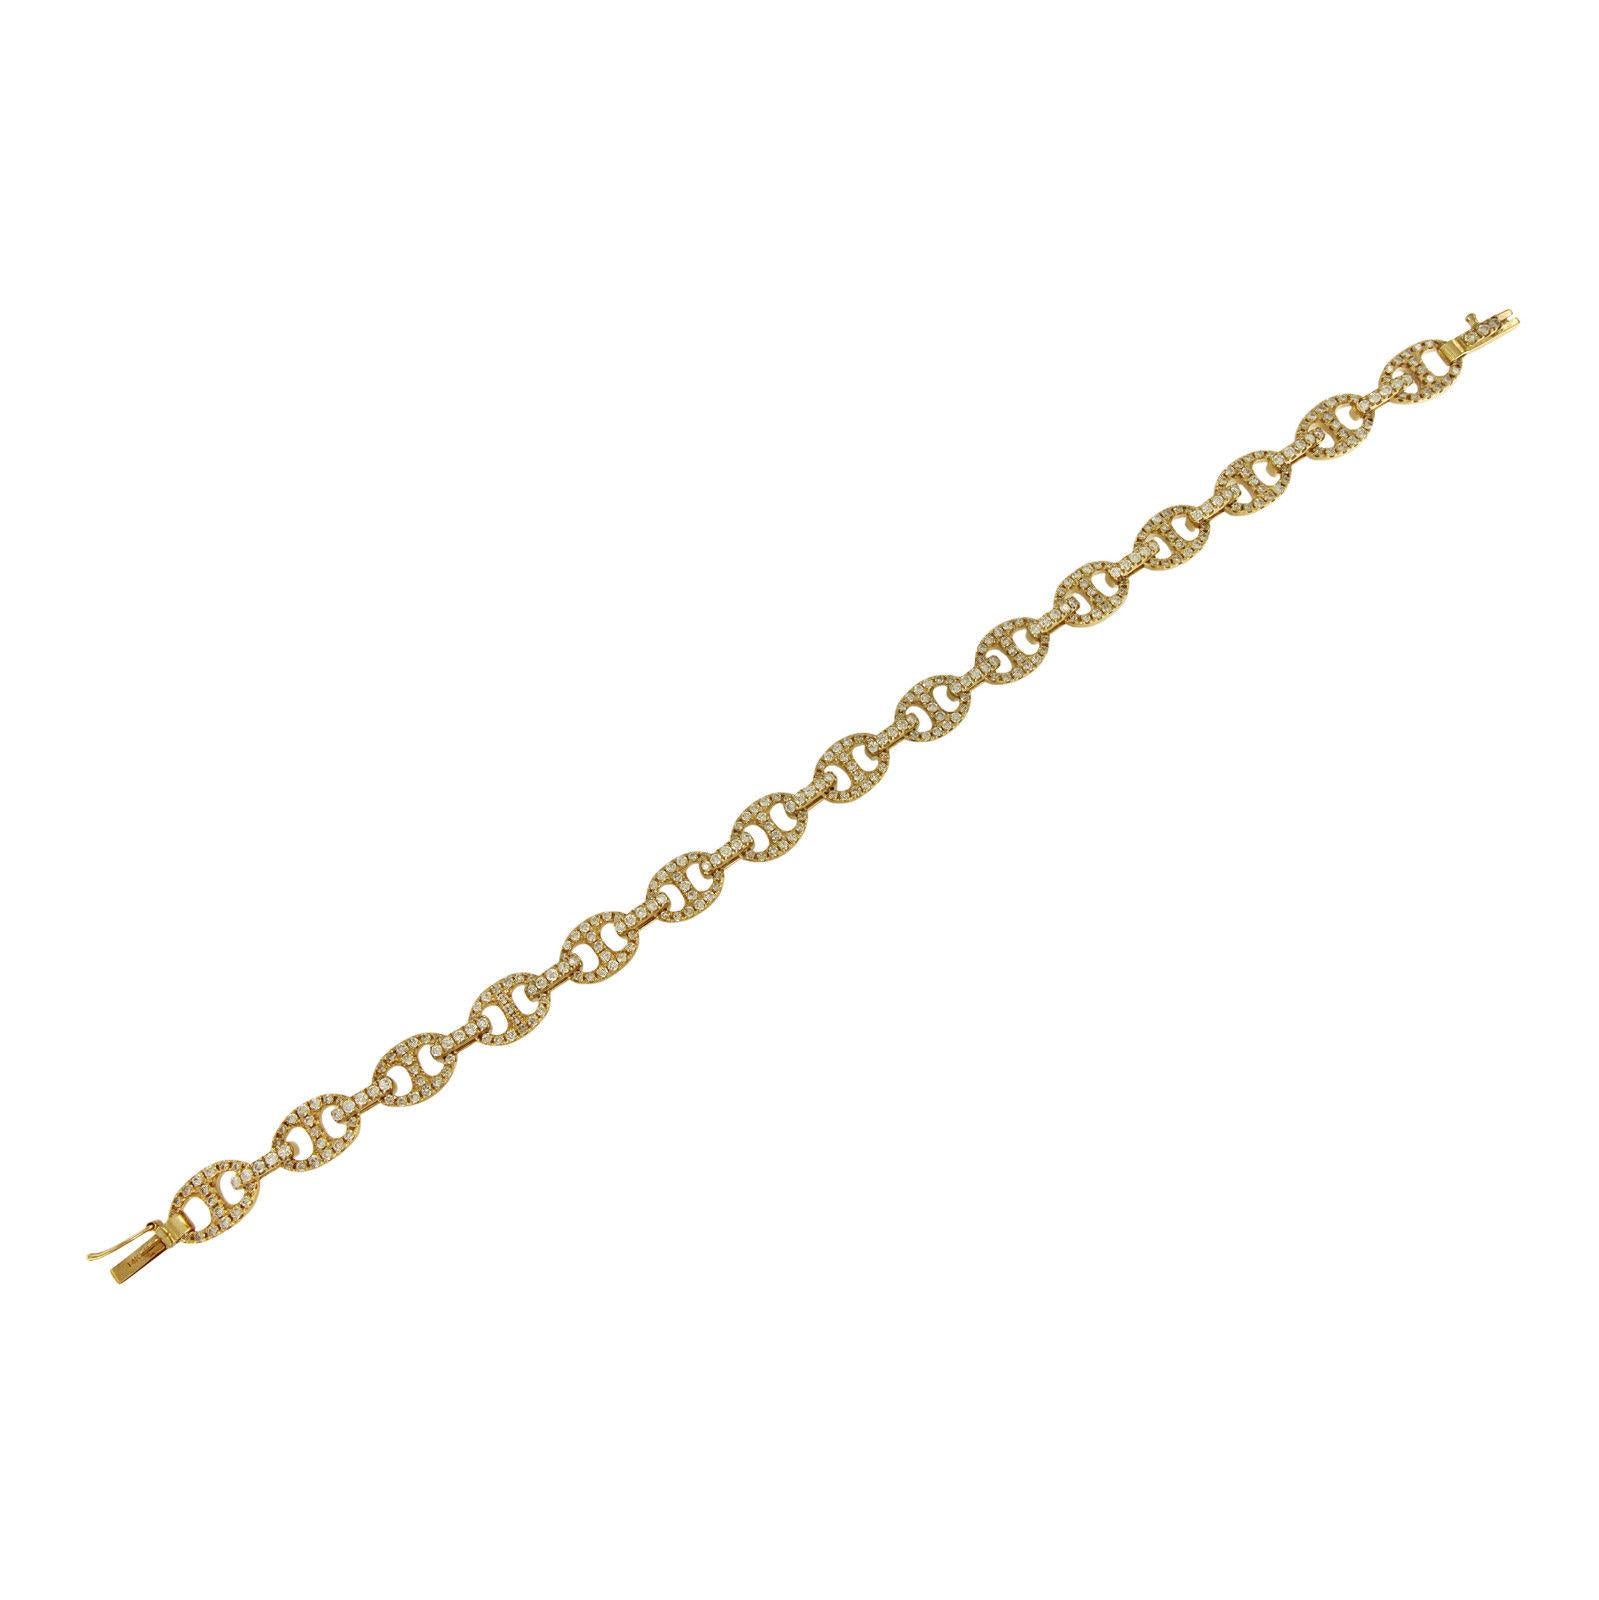 14k Yellow Gold
Length: 8.5”
Width: 0.3”
Bracelet Weight: 24.9 gr
Diamond: 5.5 ct, VS clarity, G color

*New, no tags 